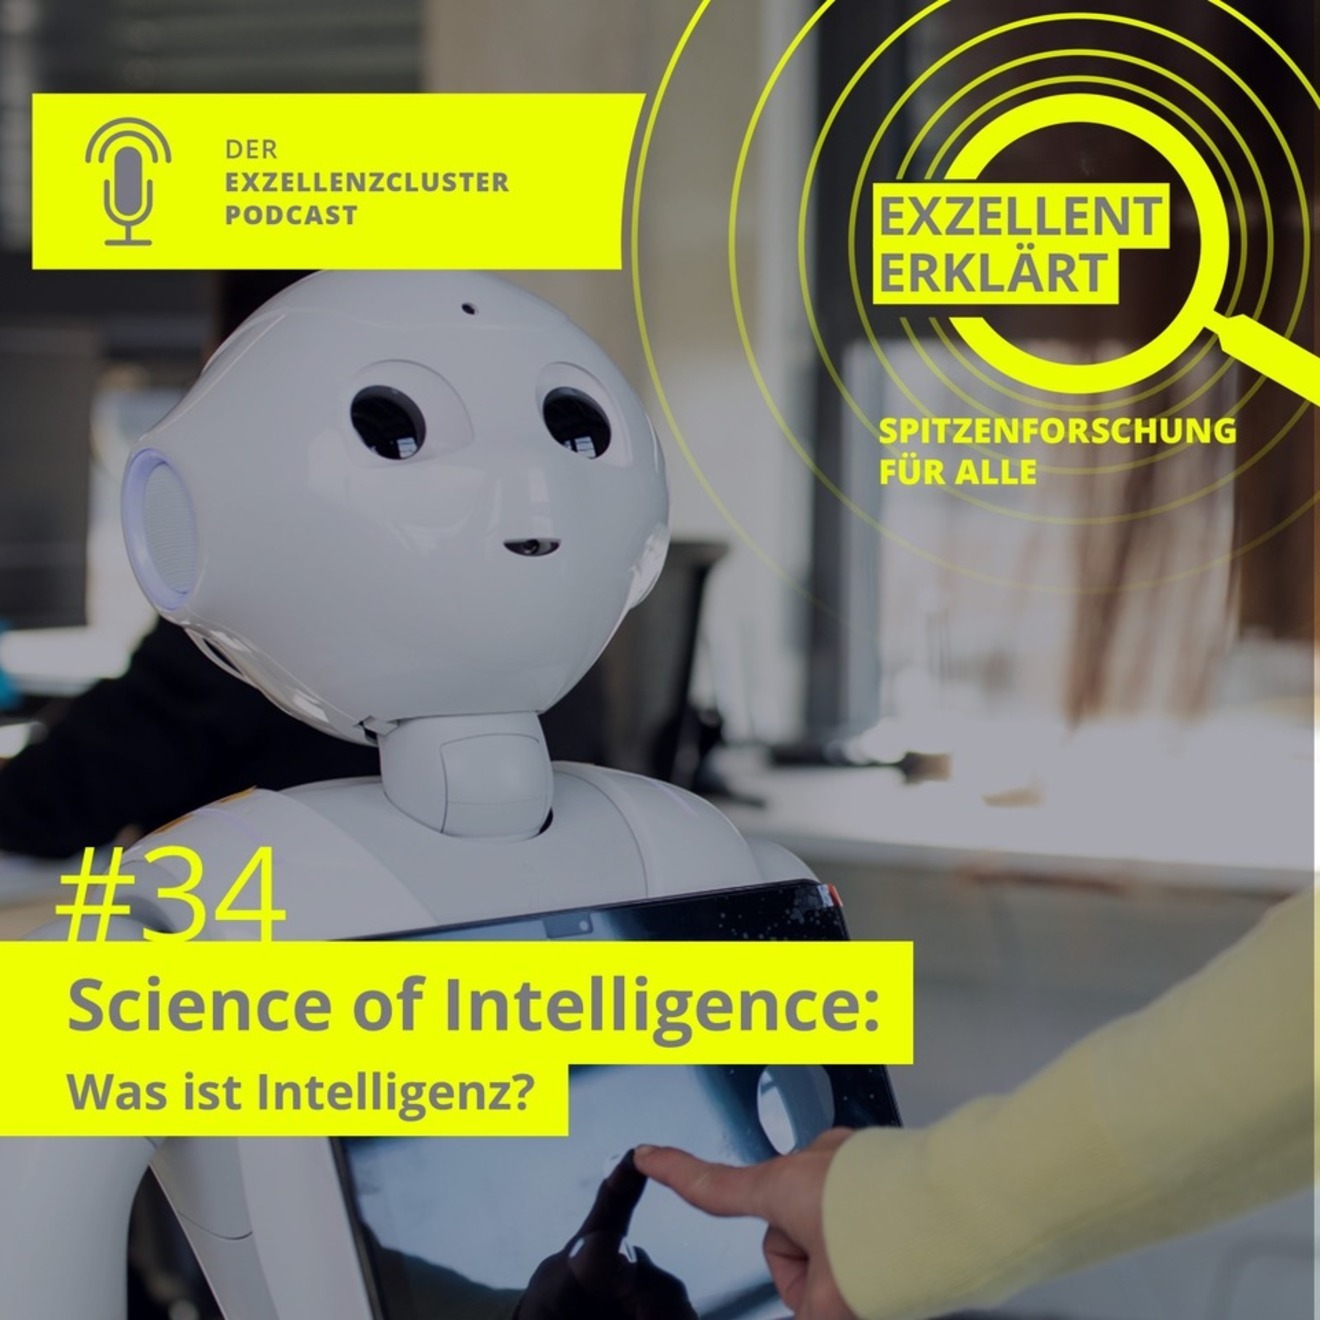 What is Intelligence? In new episode of podcast “Exzellent erklärt,” Oliver Brock talks about intelligence and SCIoI